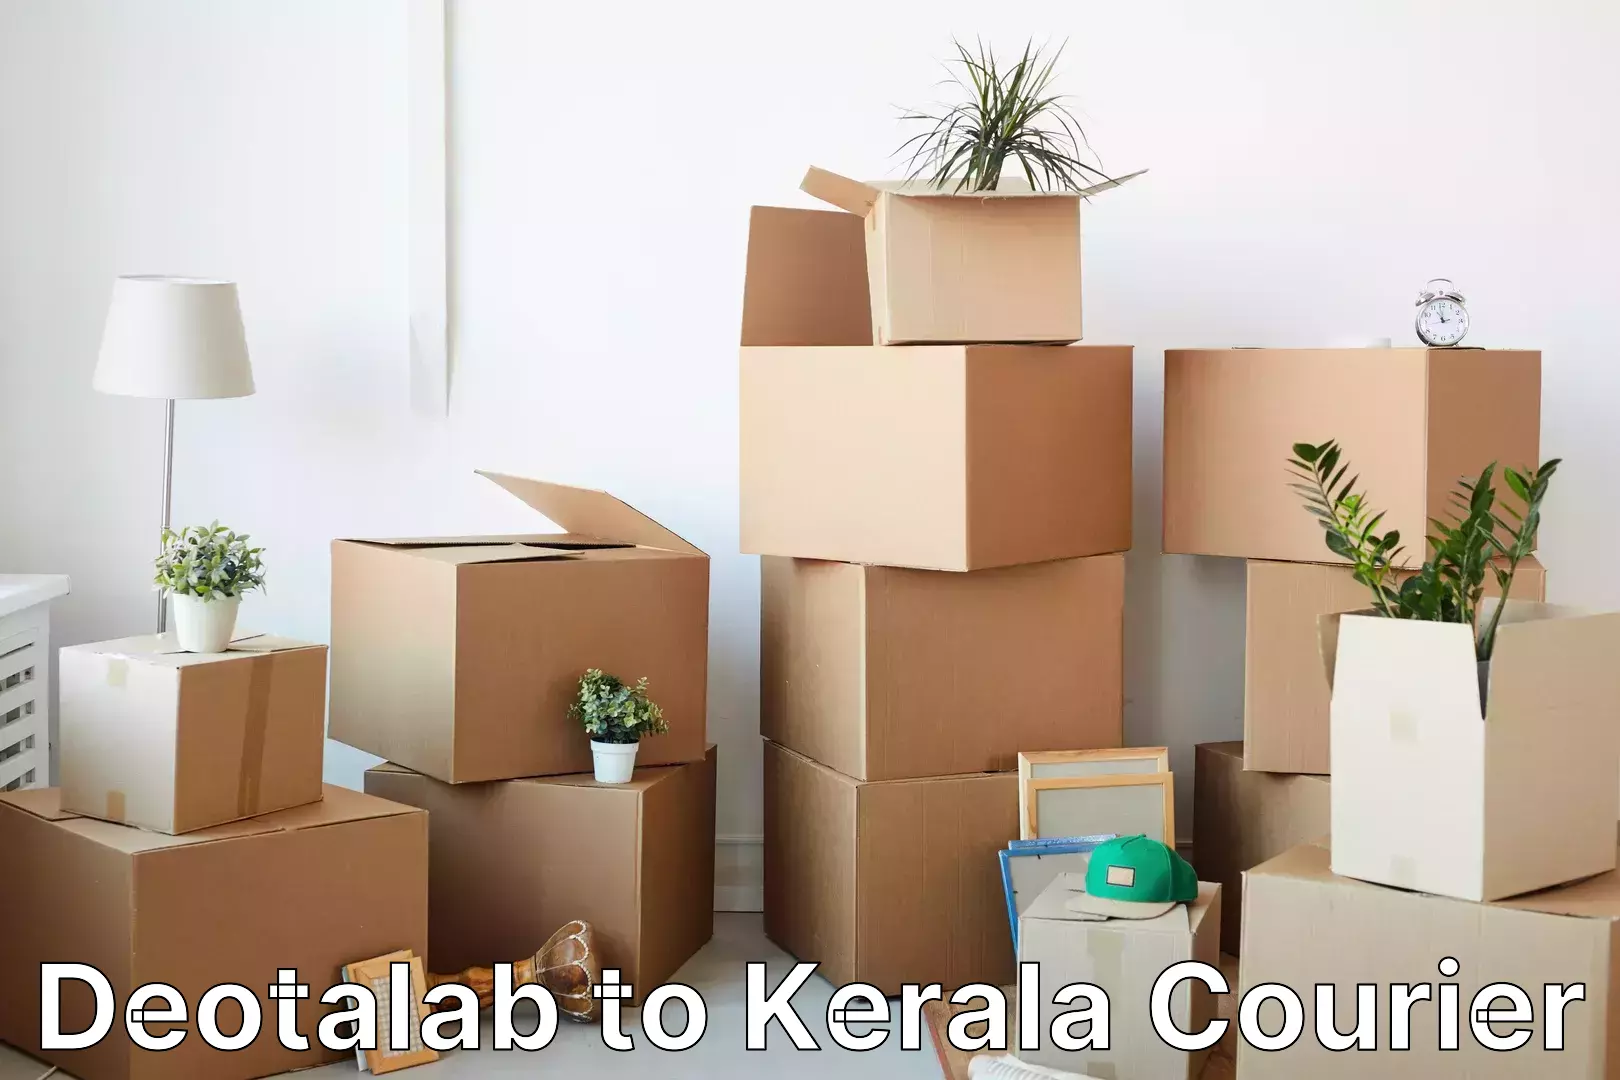 Delivery service partnership Deotalab to Kerala